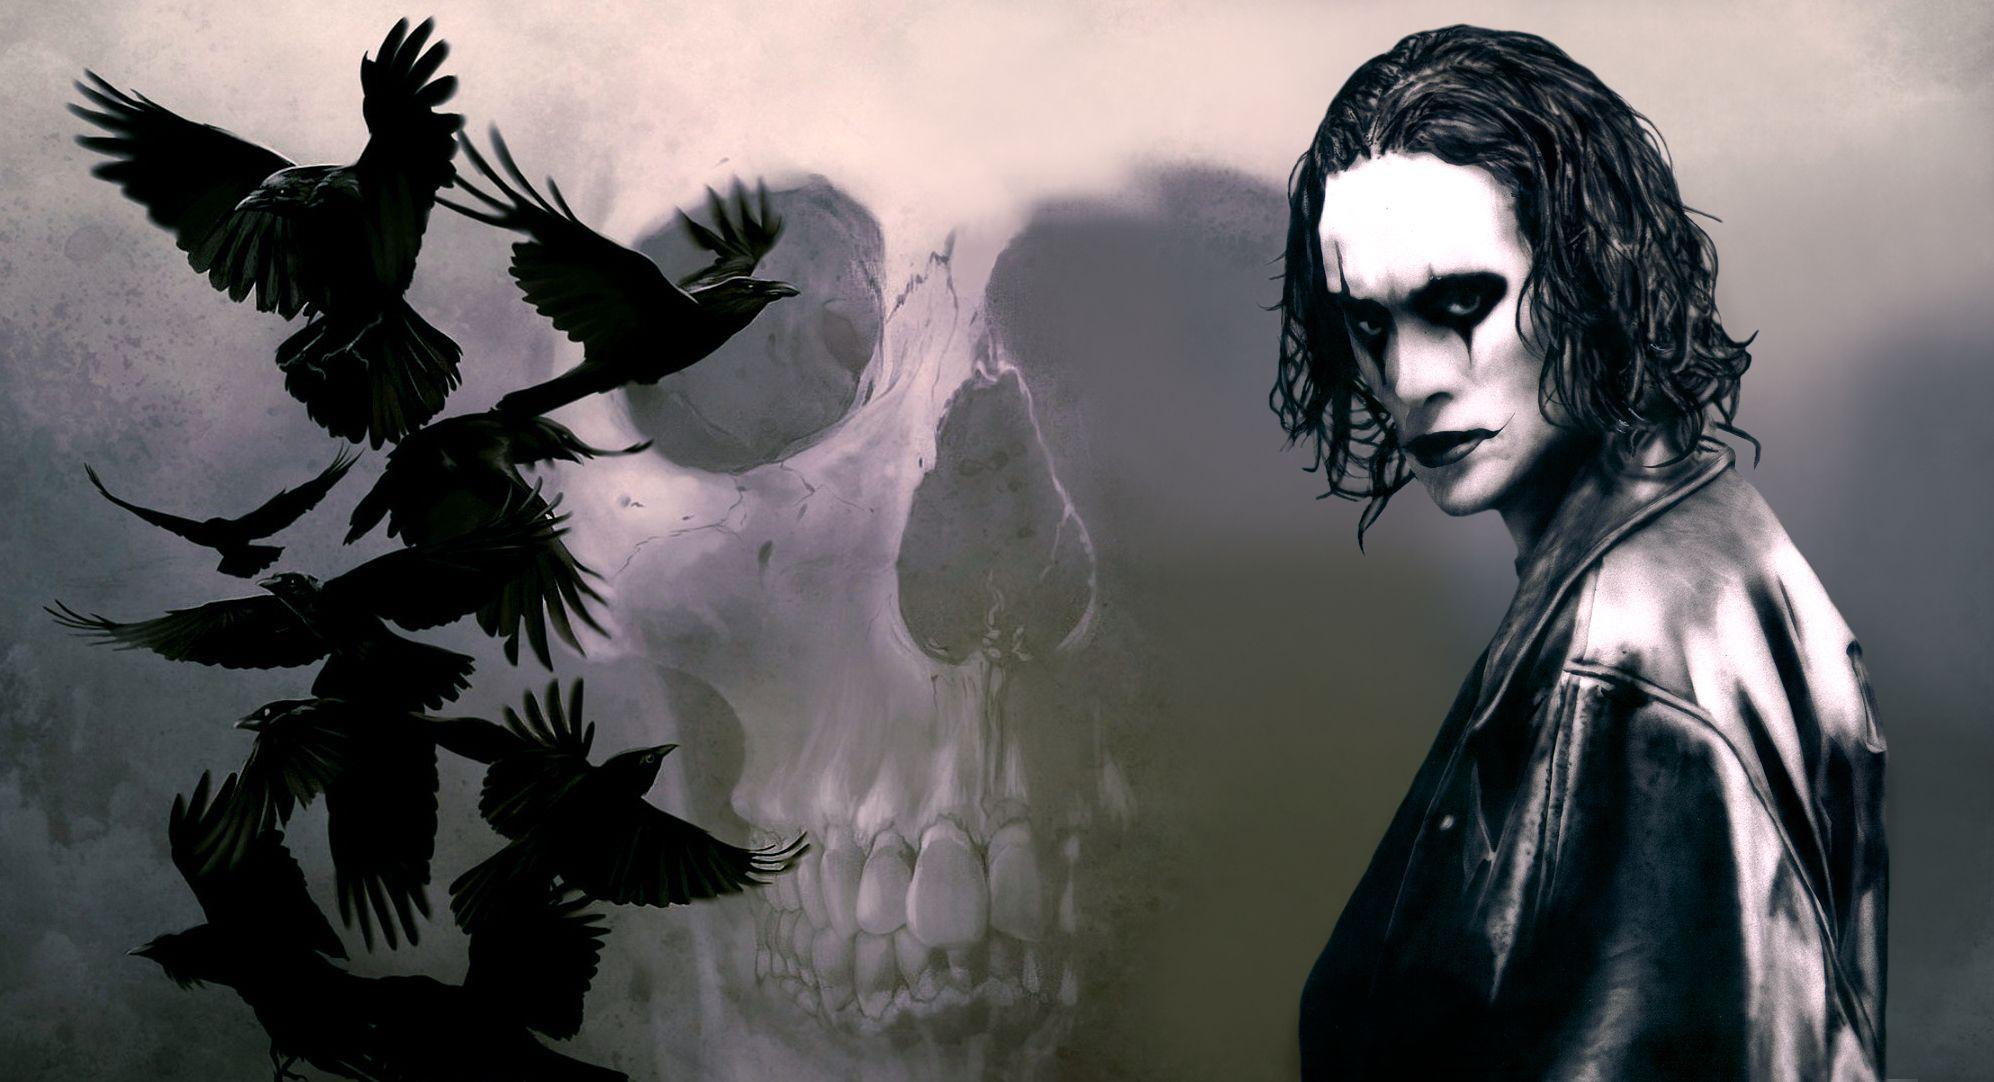 The Crow Wallpaper, HD Creative The Crow Image, Full HD Wallpaper